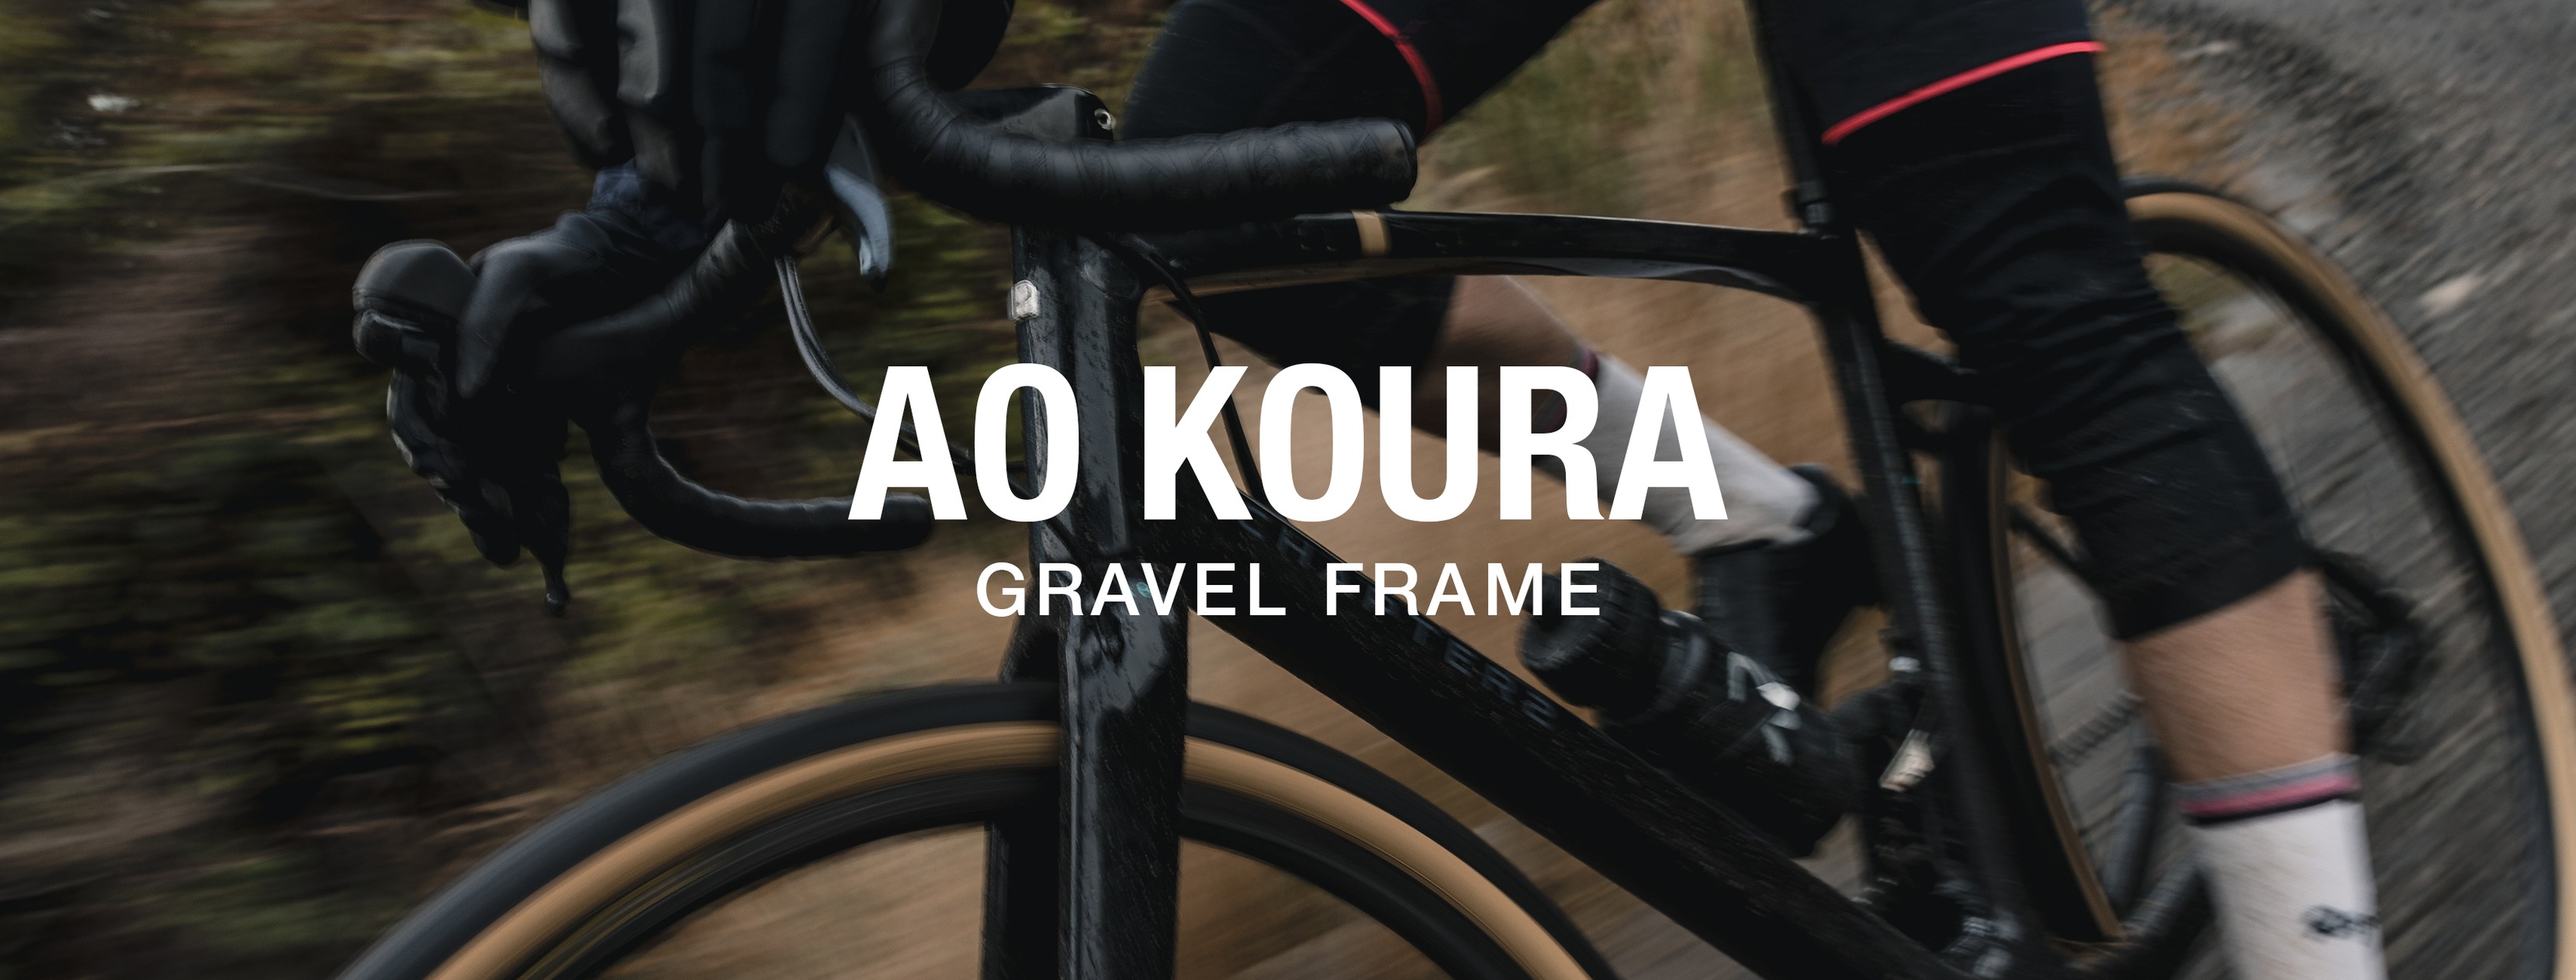 CHAPTER2 Frames Available Now!